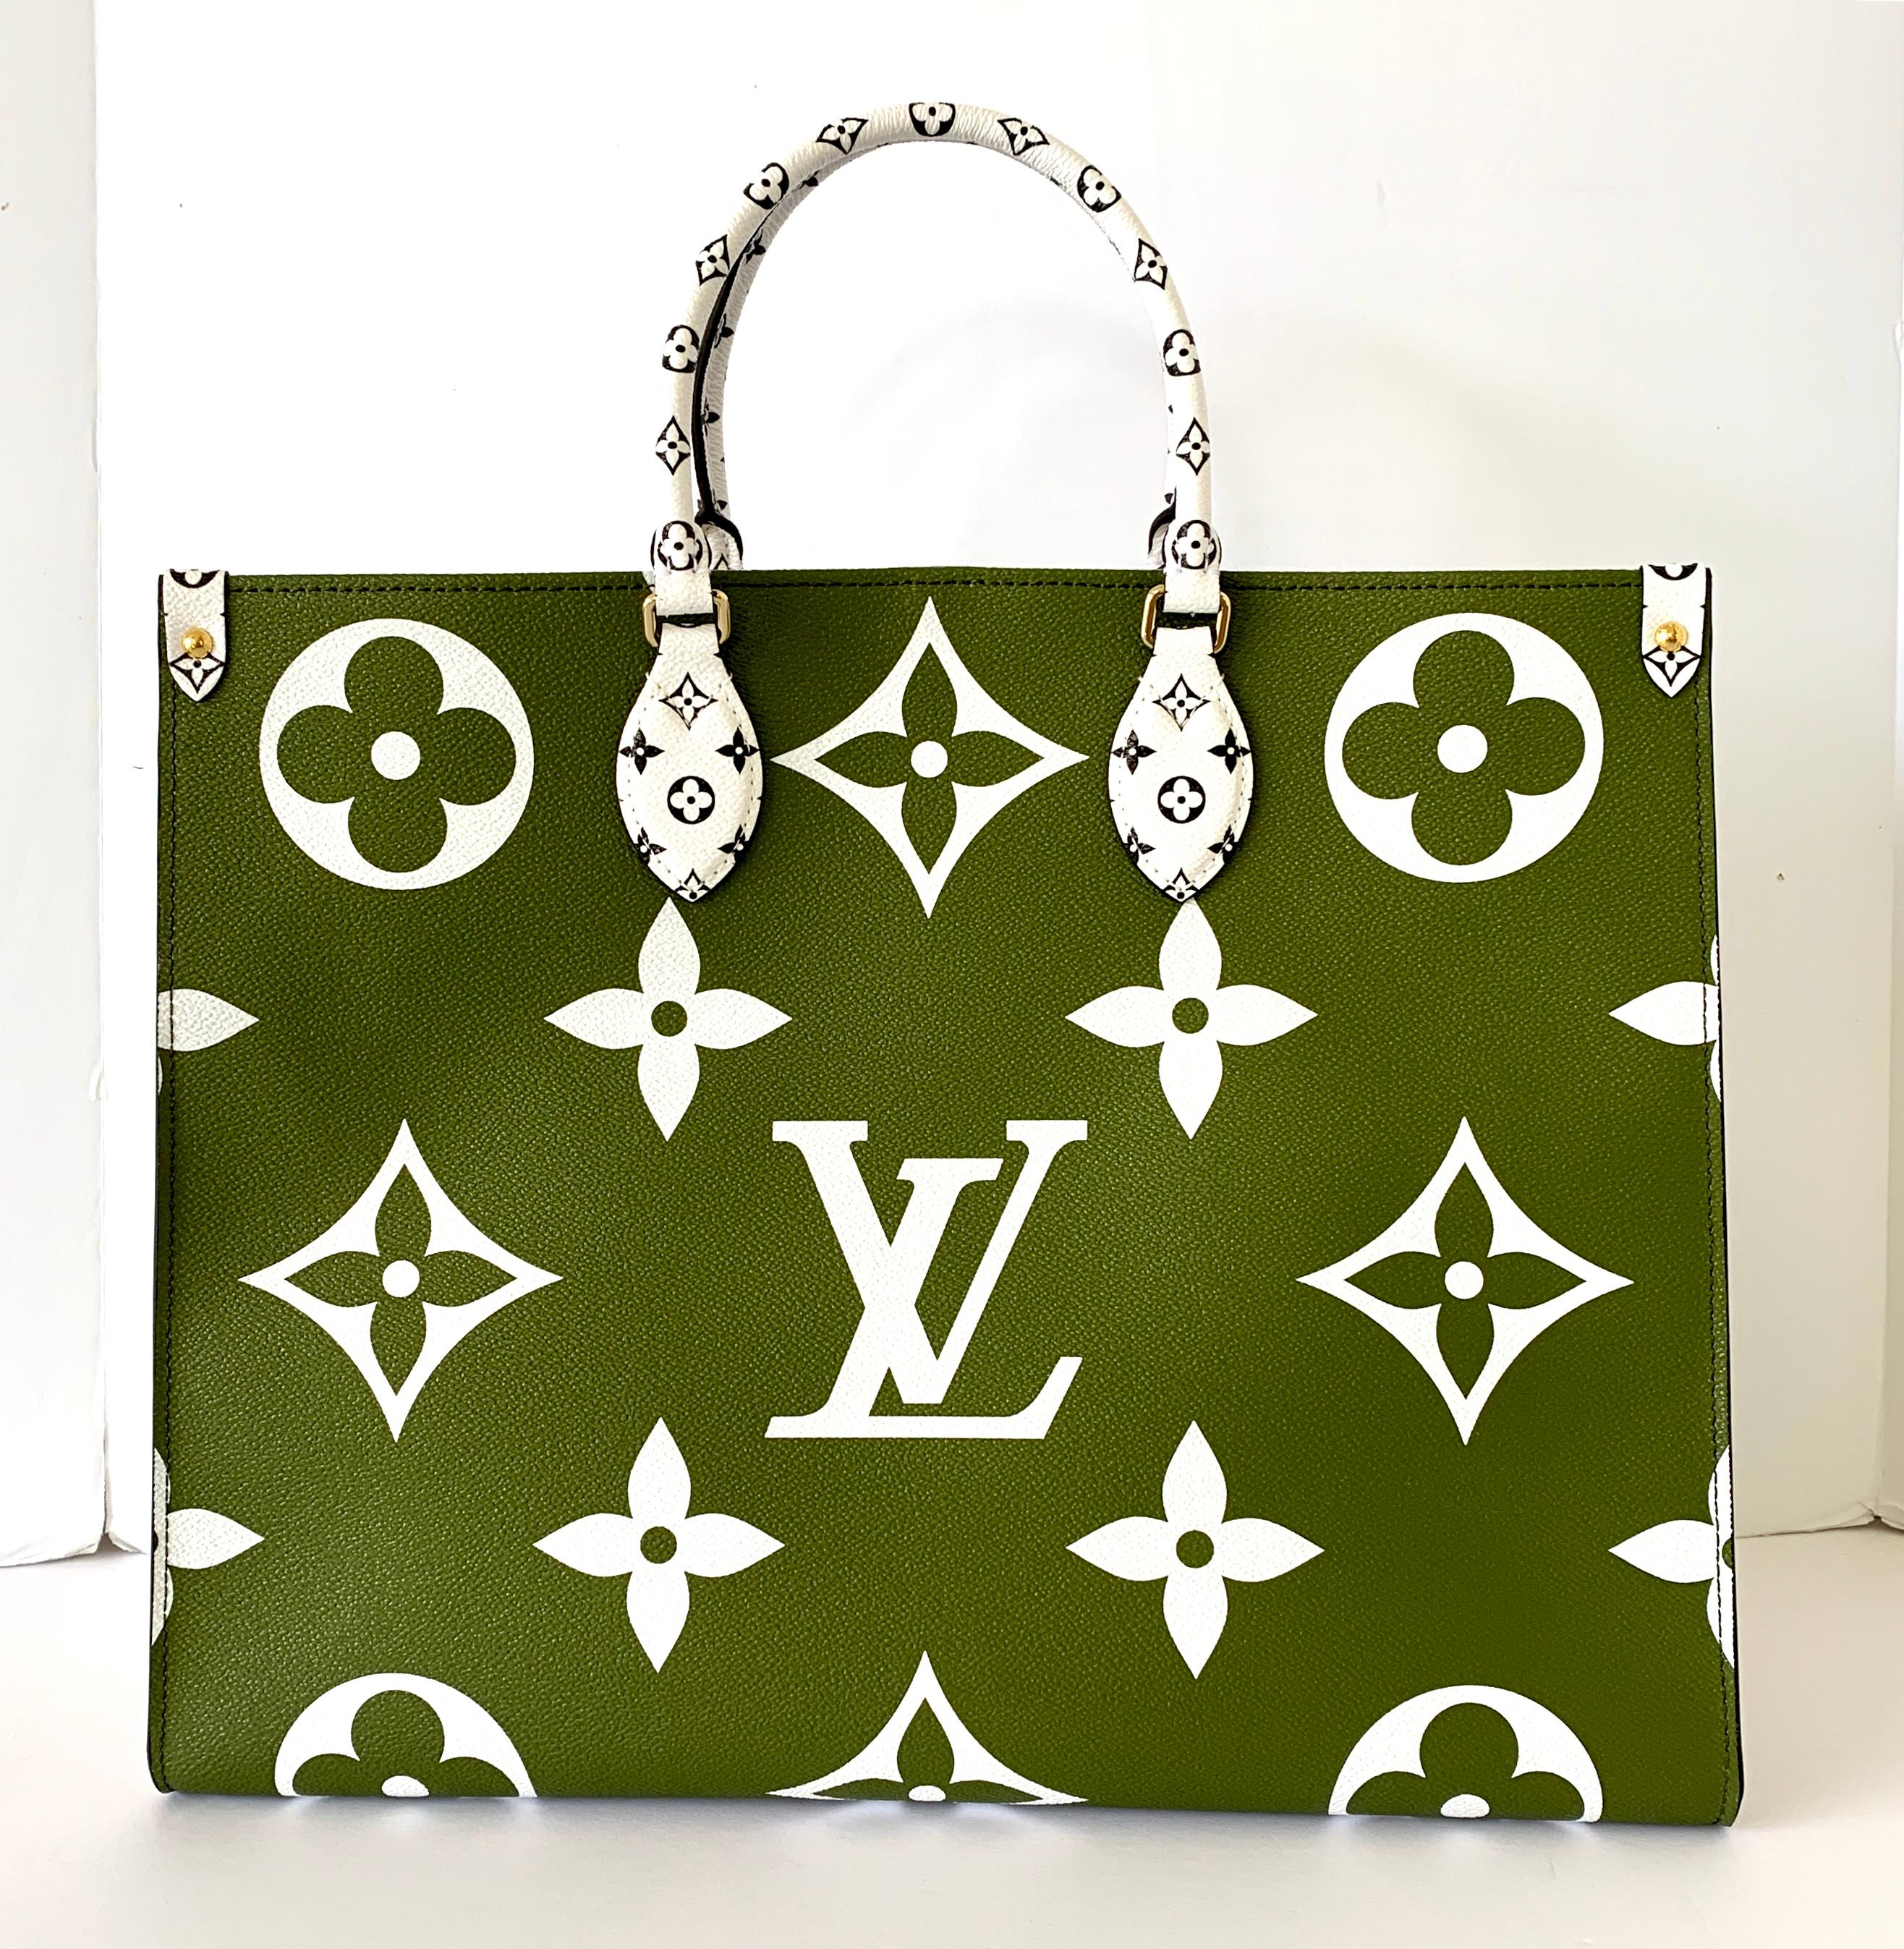 Louis Vuitton 
Onthego Tote
What a great bag!
 
GIANT MONOGRAM 
One side khaki the other side white
 
What a beautiful Summer Color!
16.14 x 13.39 x 7.48 inches 
(Length x Height x Width) 
L 16.1 x H 13.4 x W 7.5 inches
Khaki Green/White/Beige/Crème